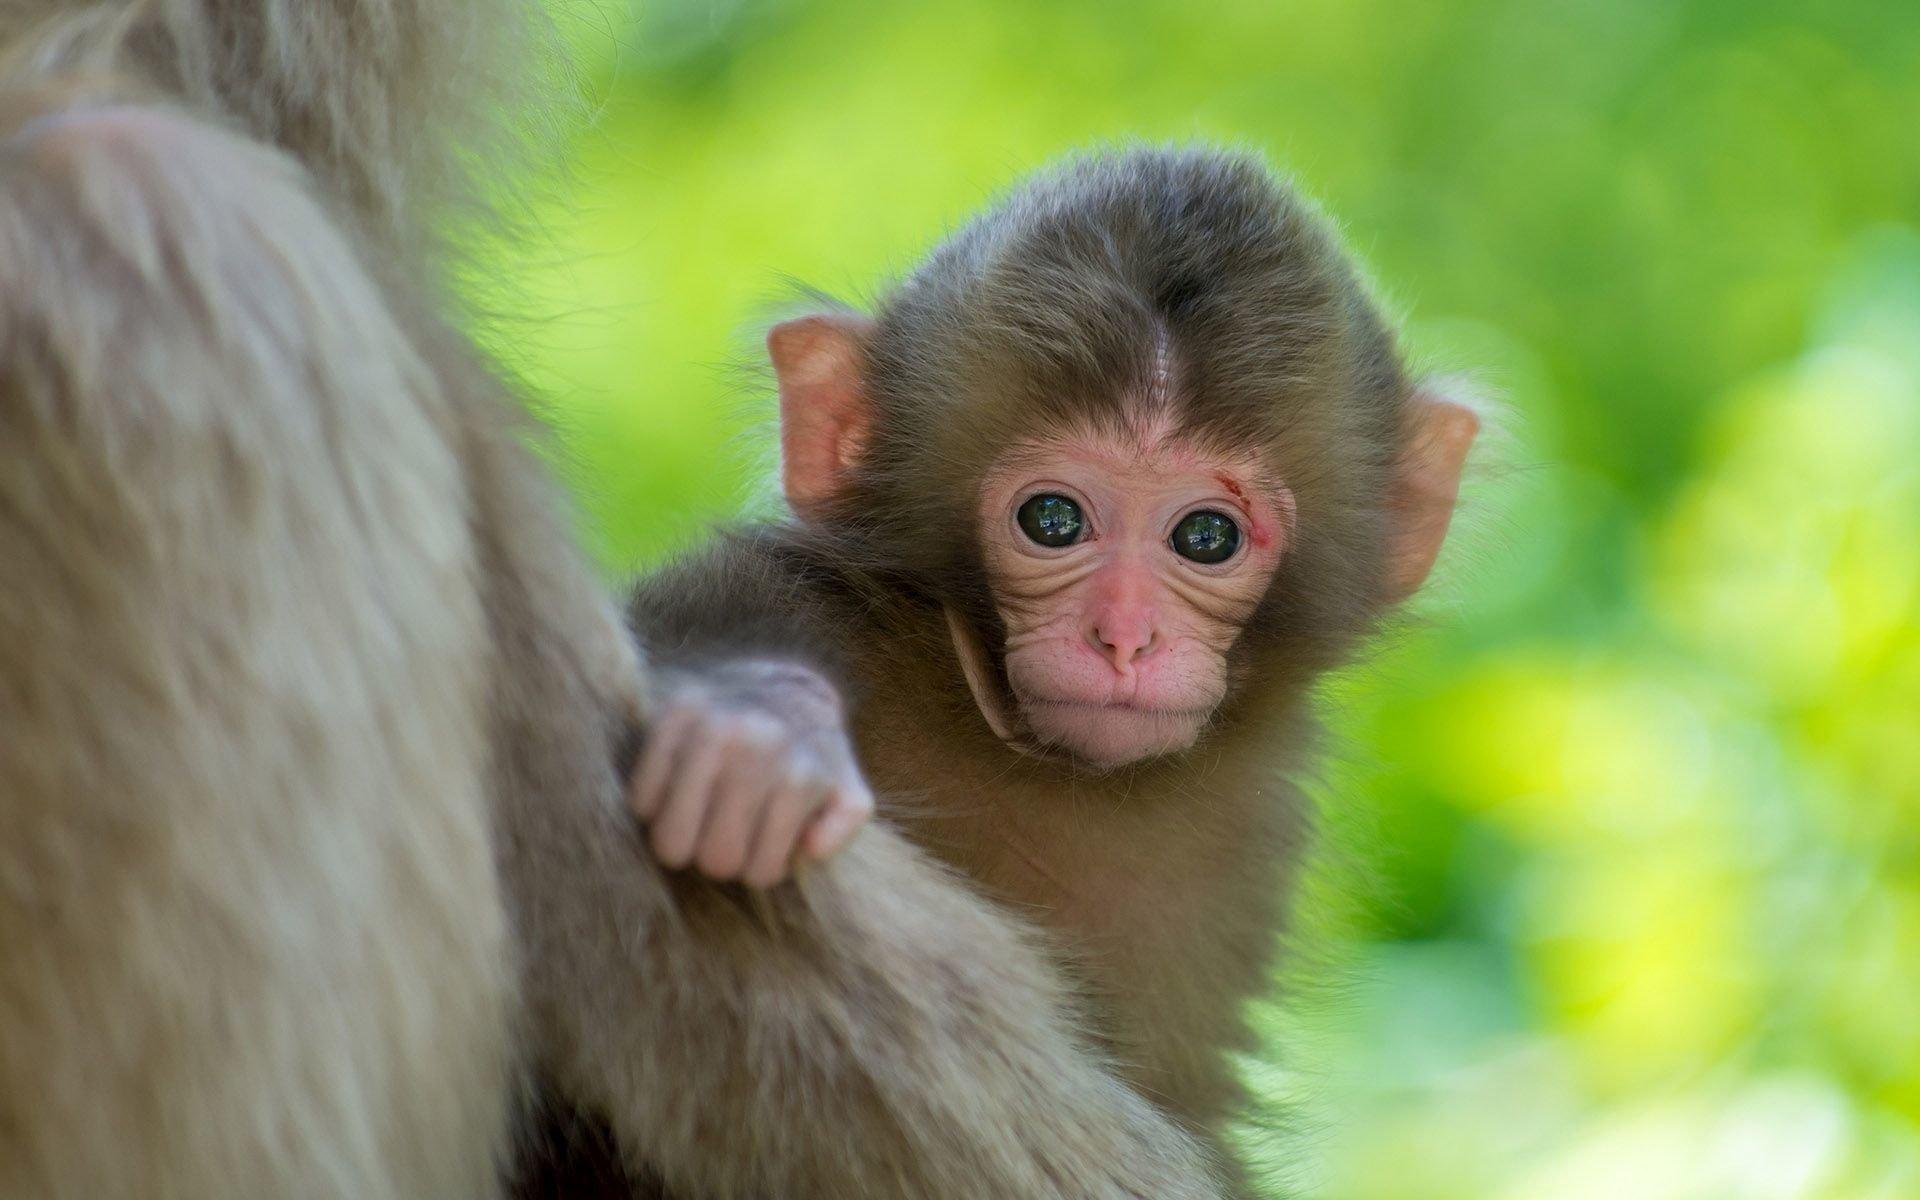 Cute Baby Monkey Wallpapers - Top Free Cute Baby Monkey Backgrounds ...